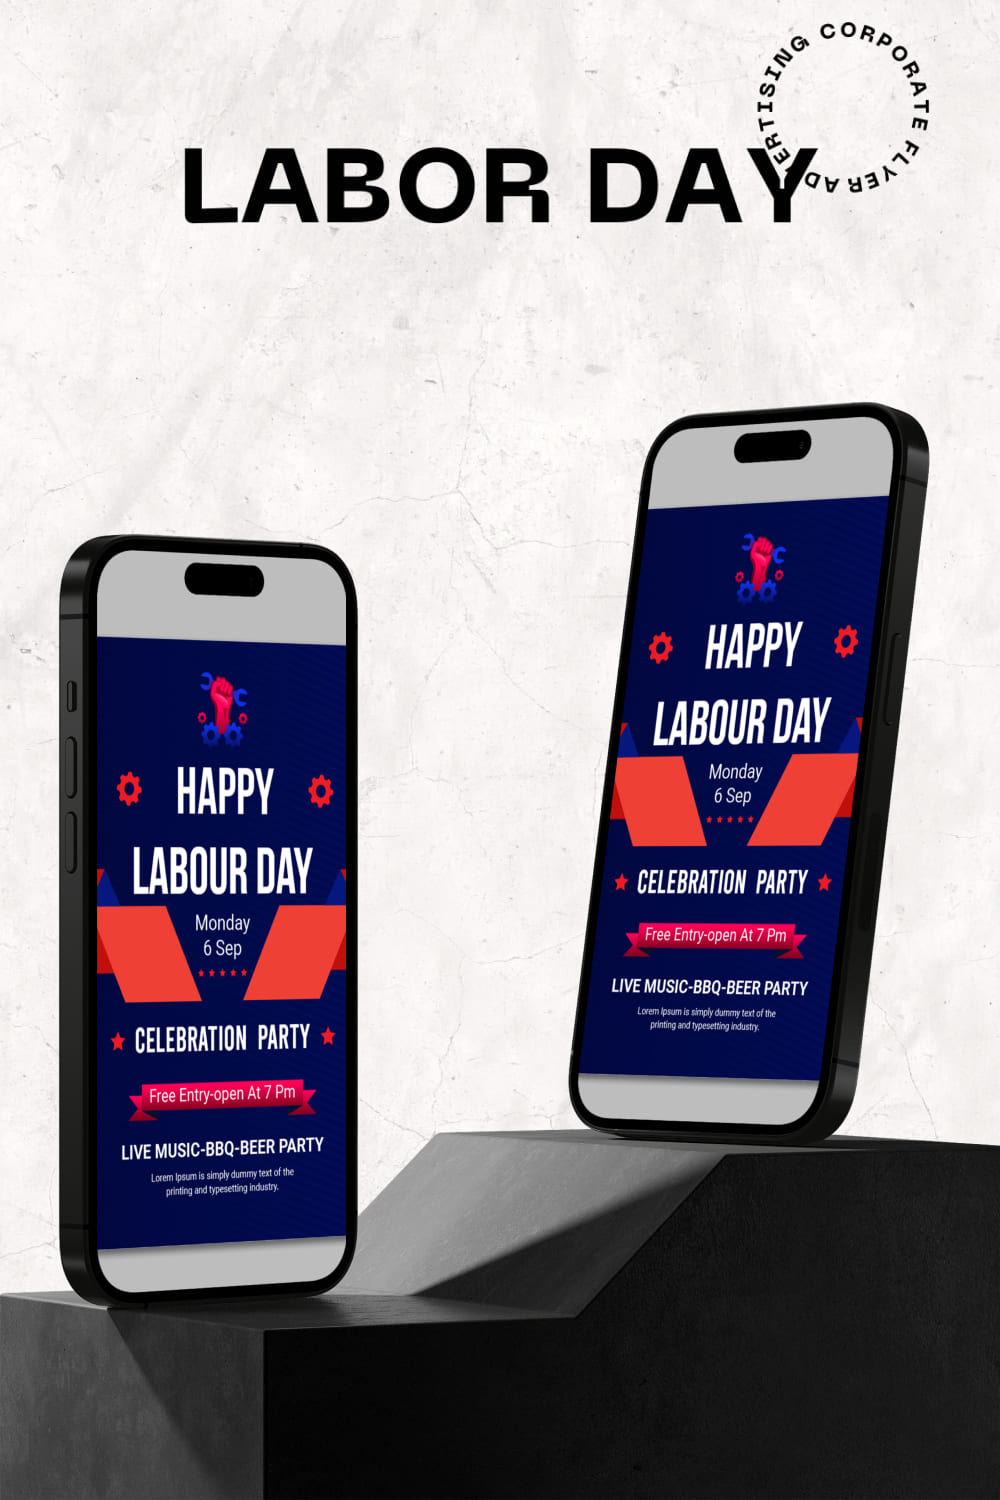 Labor Day Advertising Corporate Flyer - Pinterest.